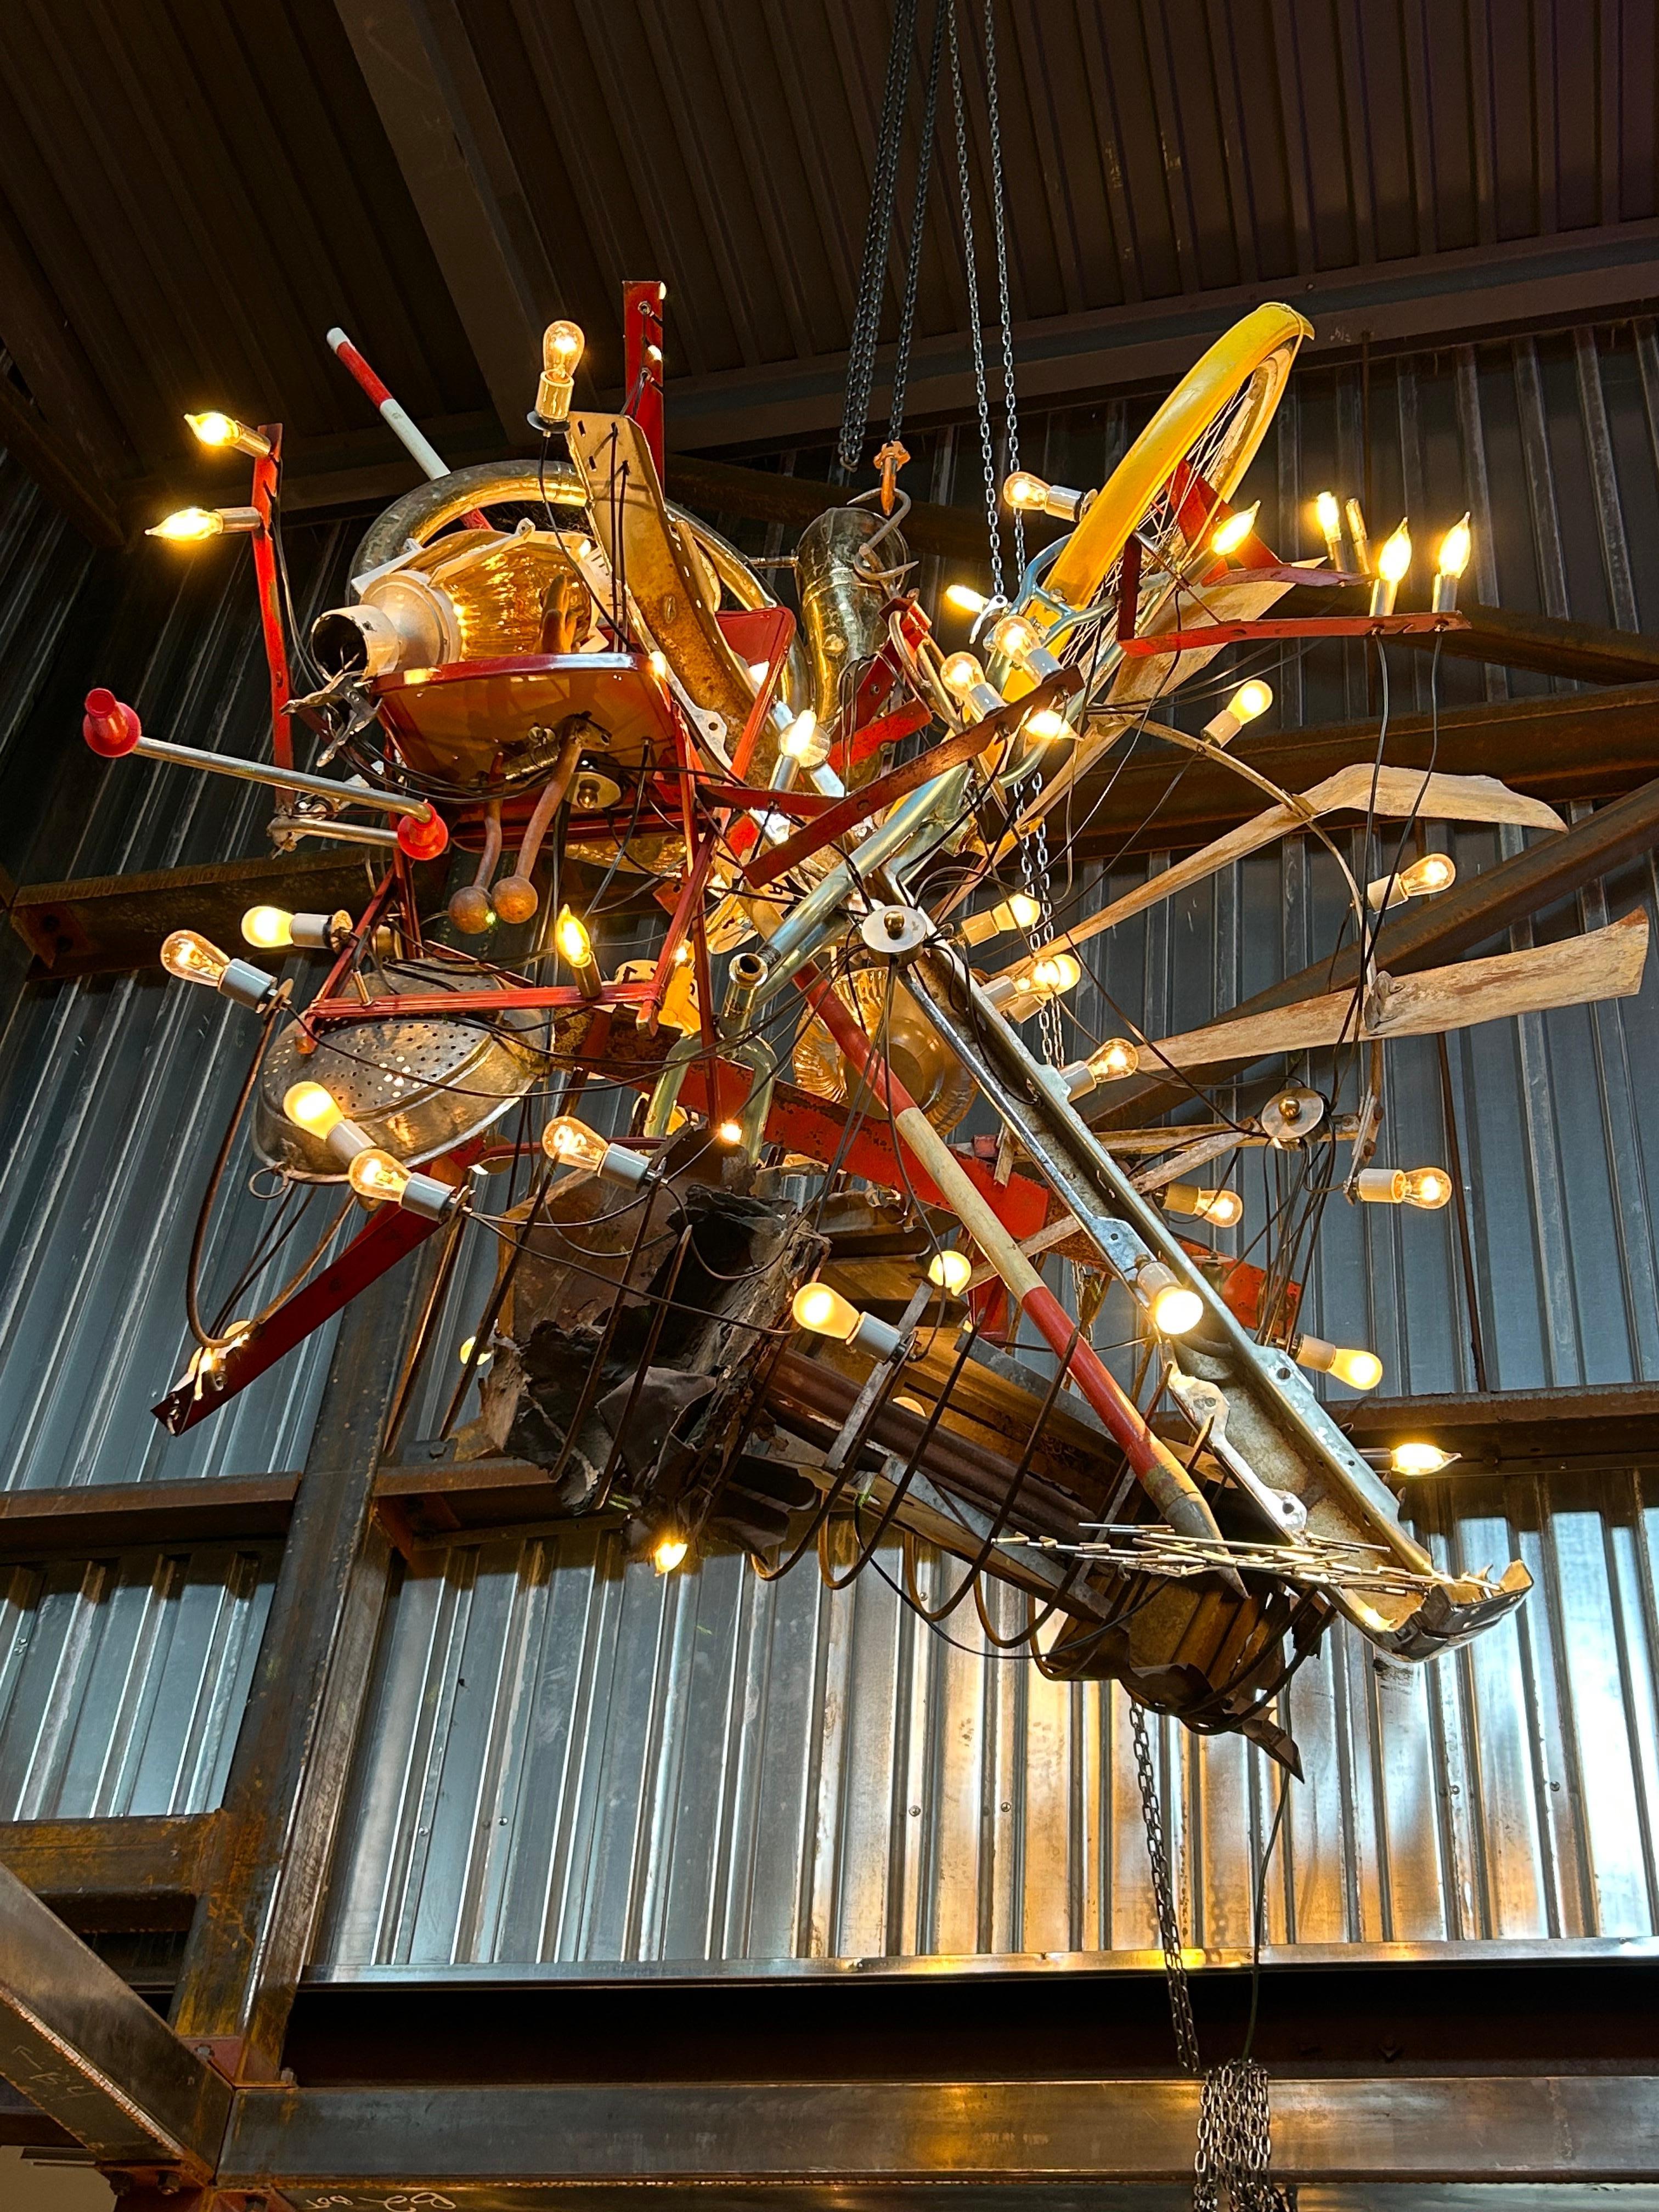 Warren Muller's artistc humorous journey is a tribute to all the wordly things that create our memories. Reclaimed and repurposed items like Former Burning Man bicycle and architectural relic from Artist's former home, and souveniers picked up along